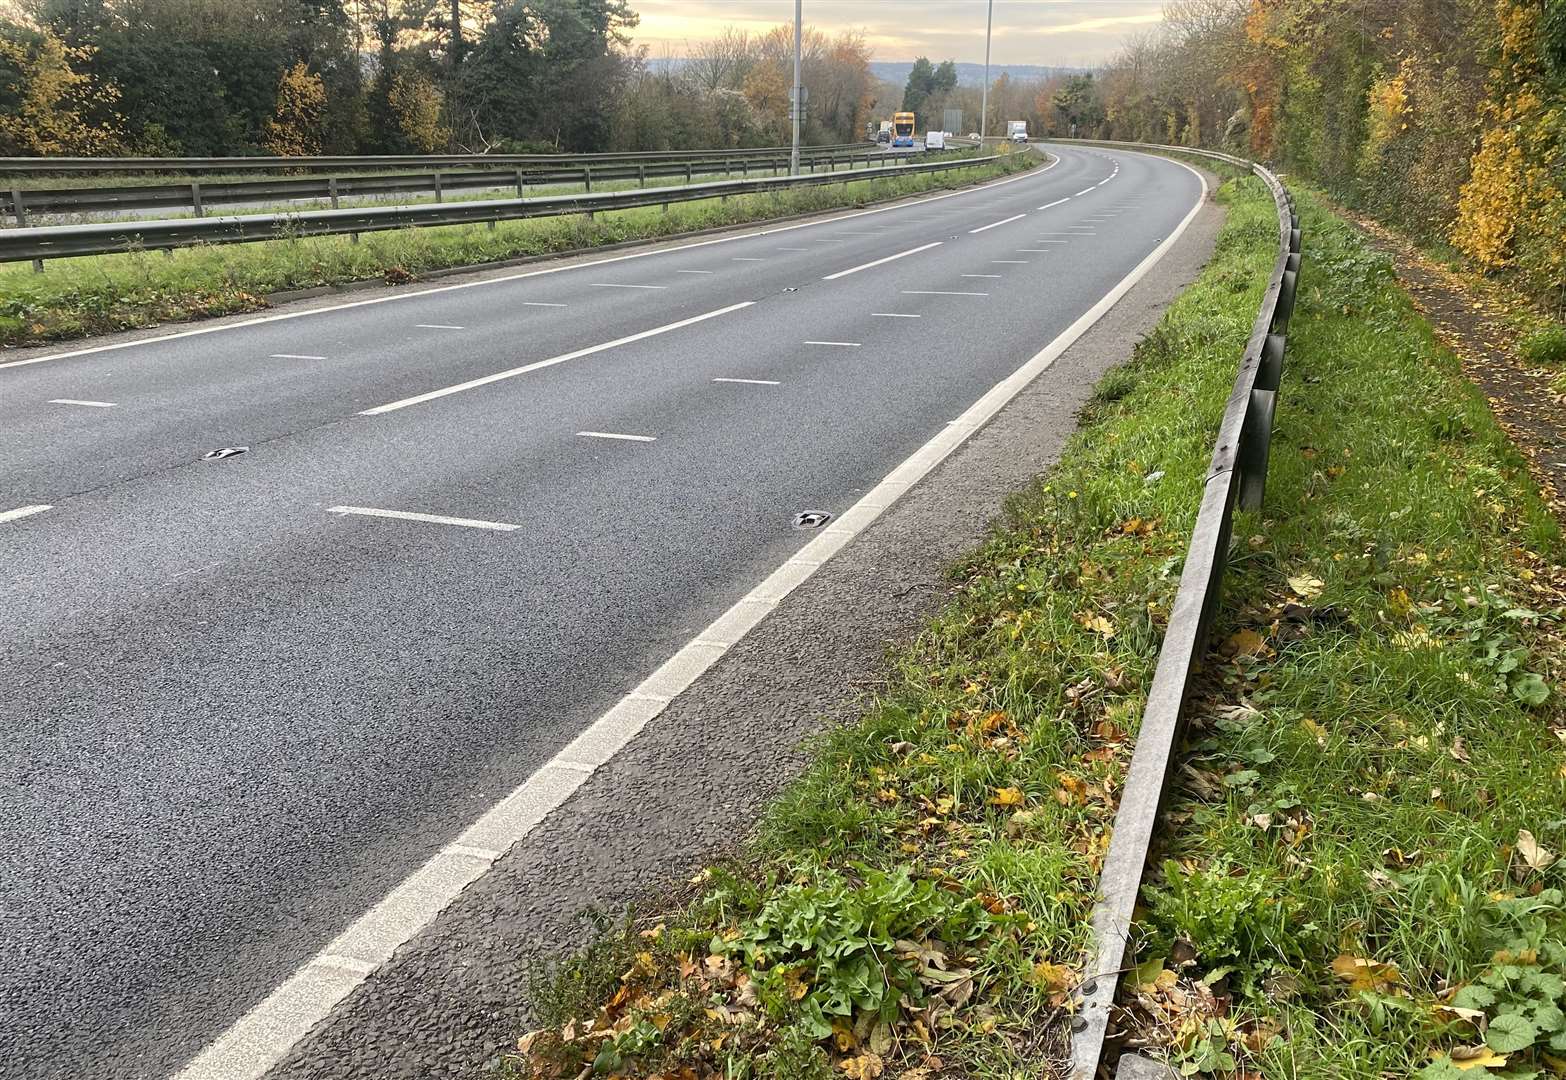 The crash happened on the A249 between Maidstone and Detling Hill